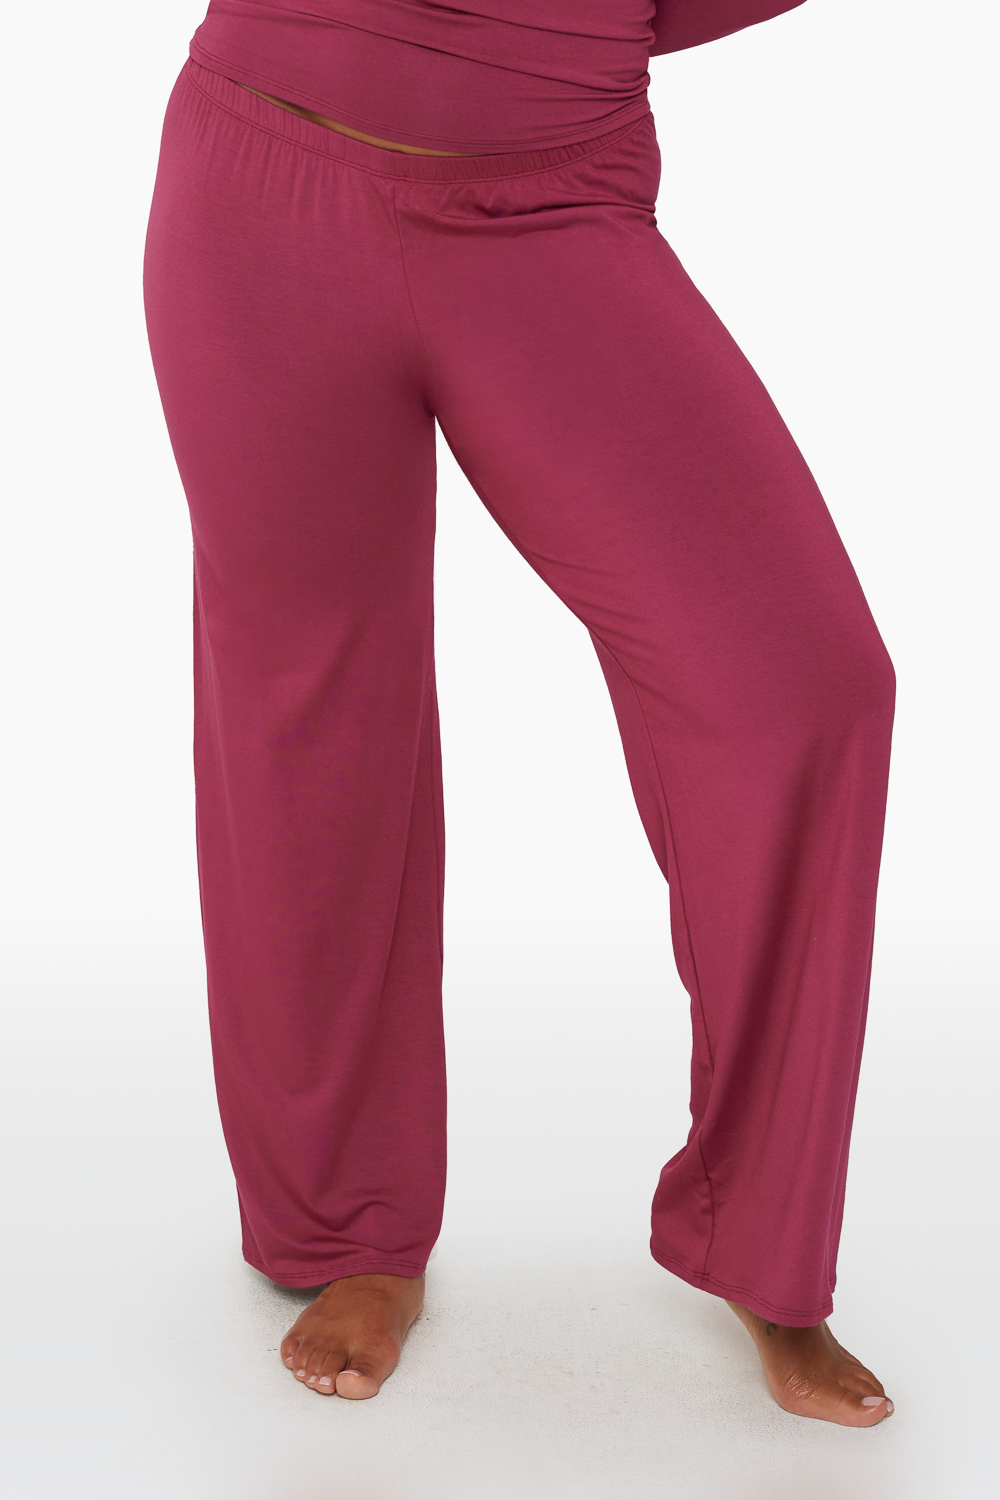 SET™ CLASSIC SLEEP PANTS IN ORCHID